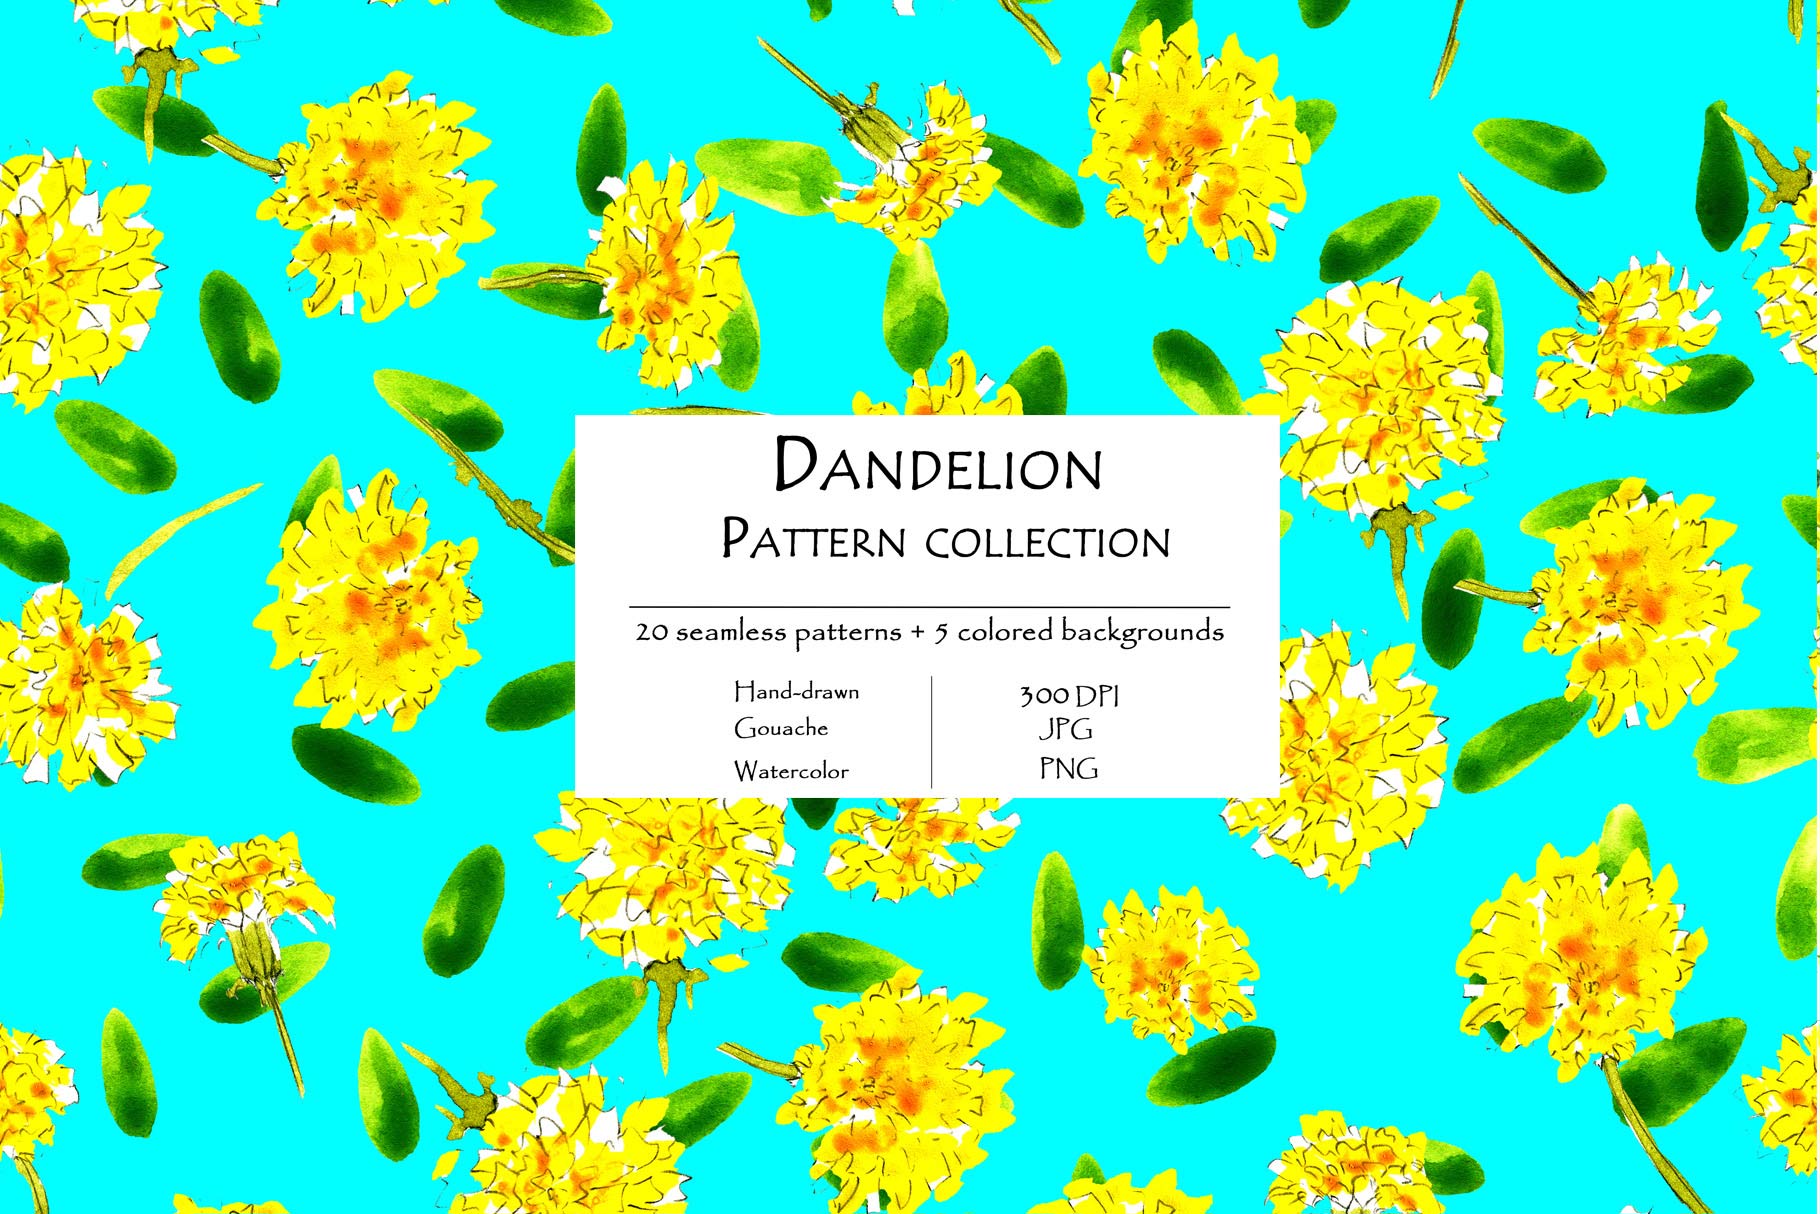 Dandelion Pattern Collection Of 20 Seamless Patterns And 5 Colored Background Blue Background.